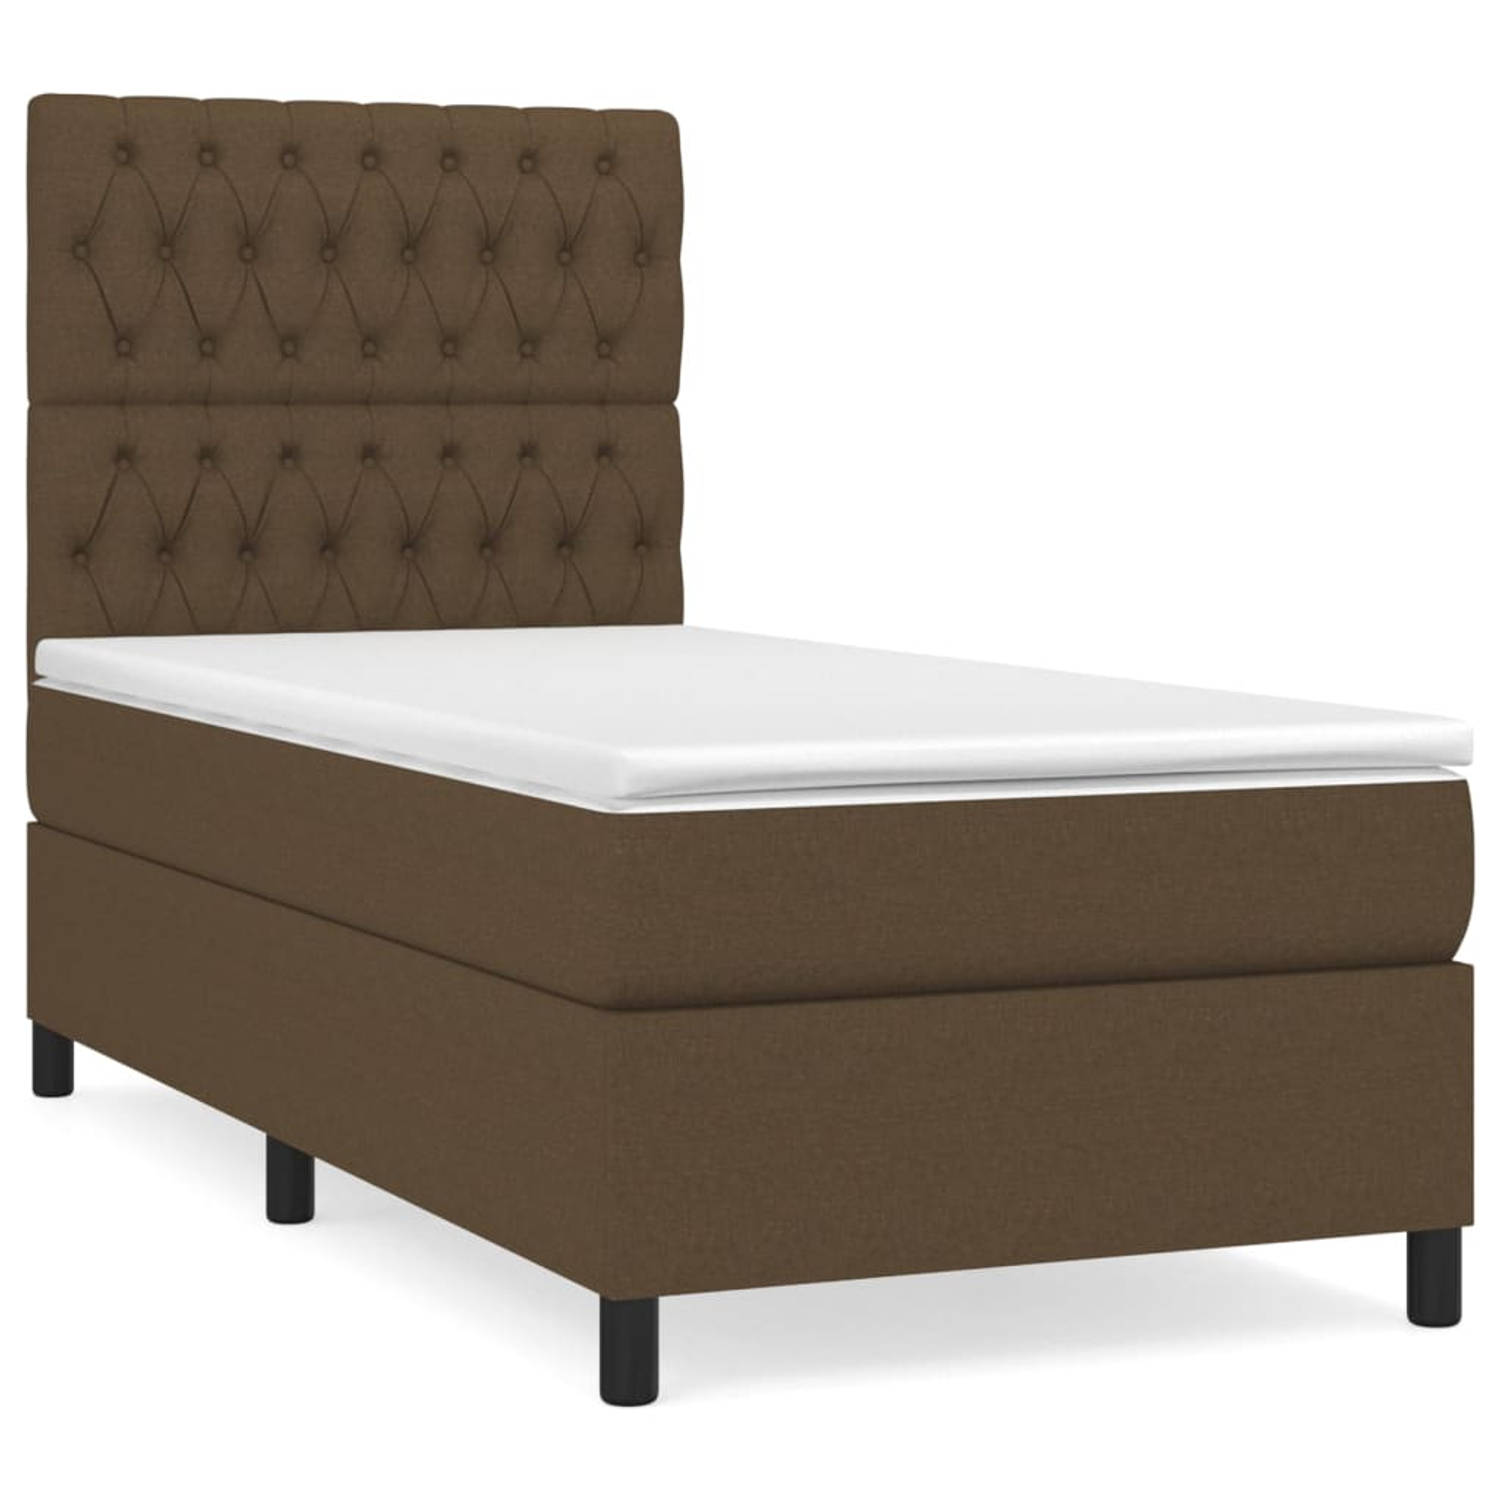 The Living Store Bed Donkerbruin Boxspring 203 x 100 x 118/128 cm - Pocketvering